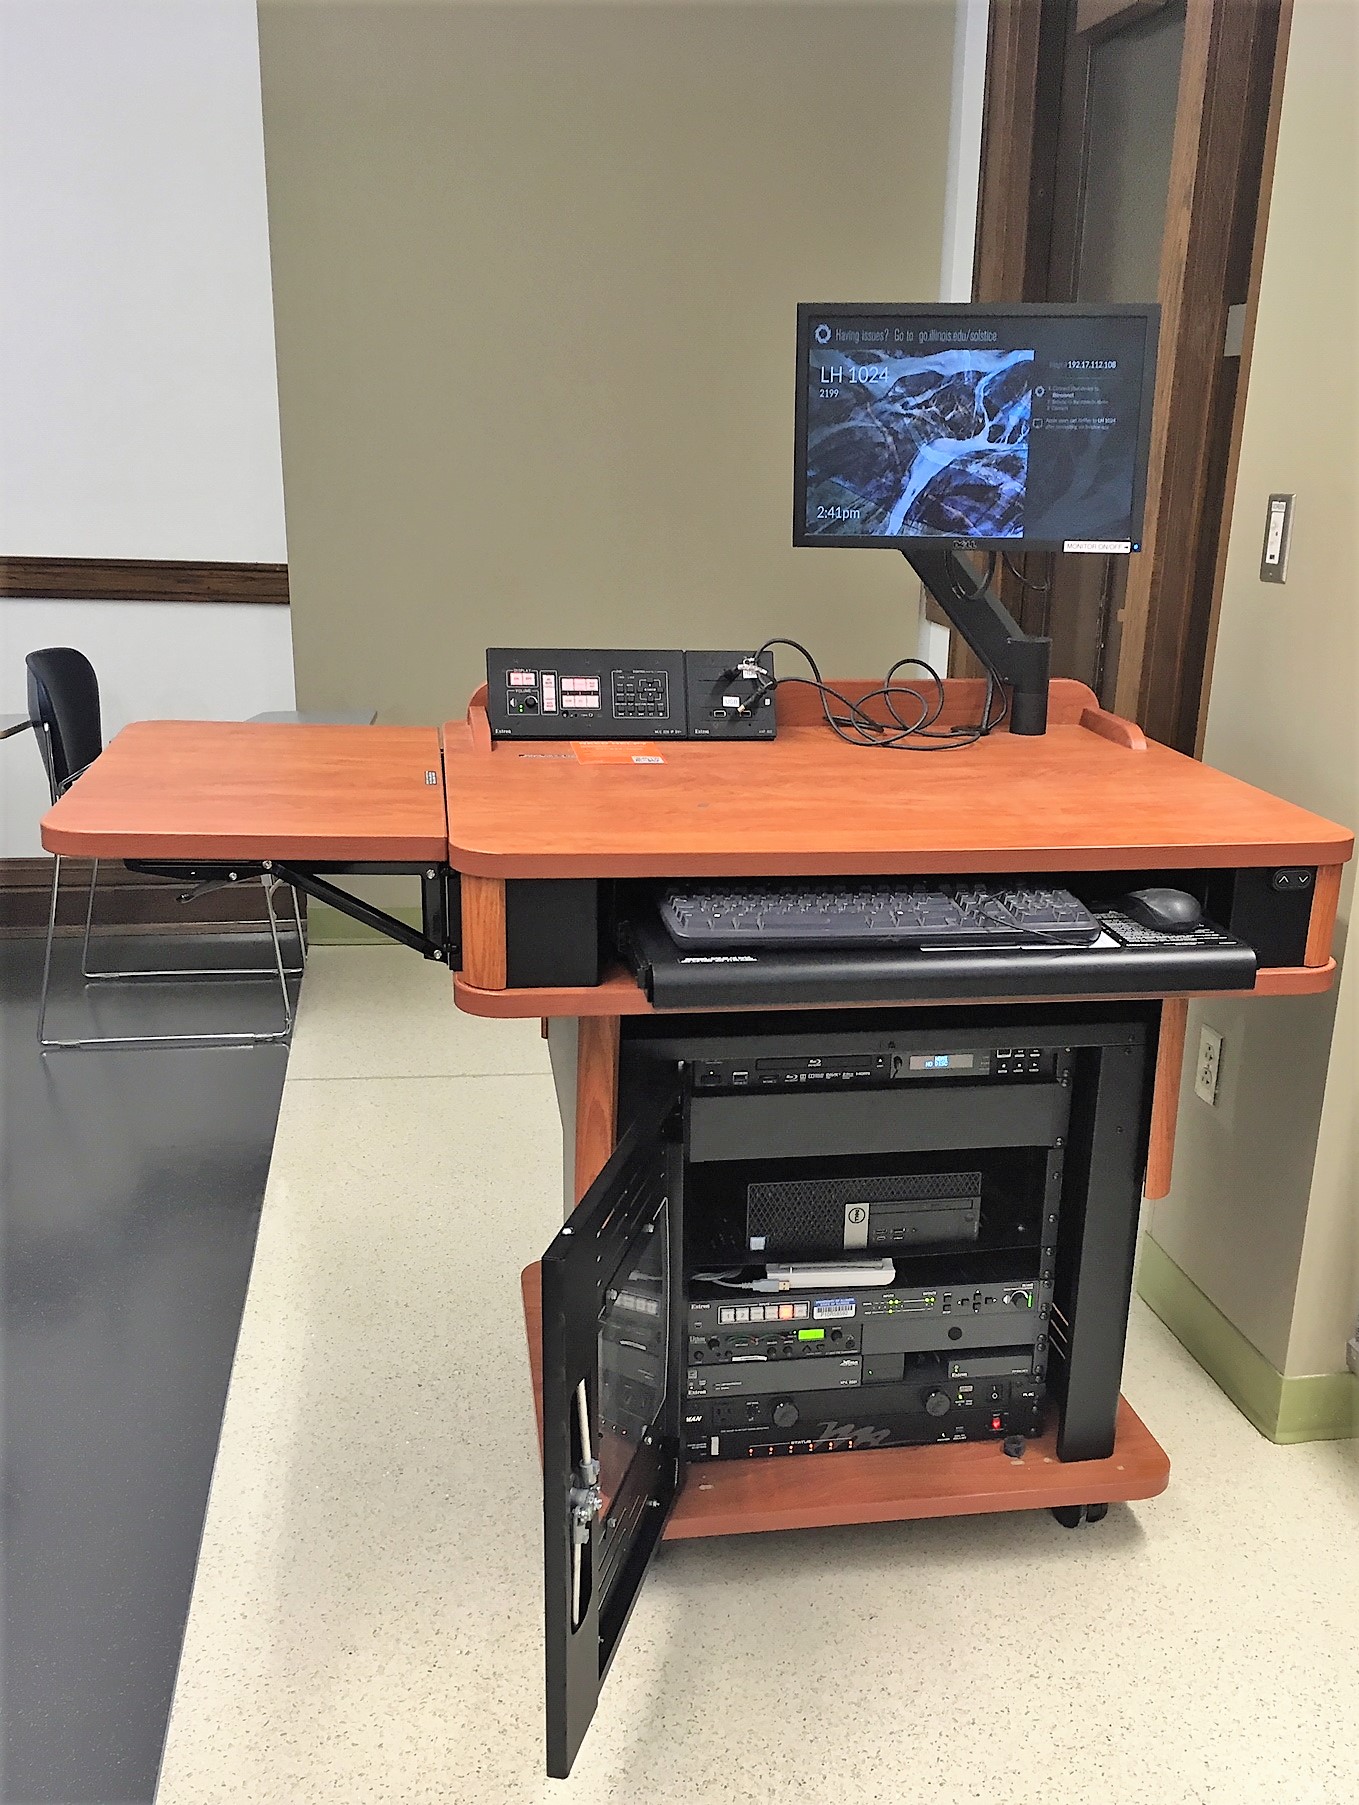 A view of the open cabinet with a computer monitor, HDMI input, a push button controller, and a audio visual rack.